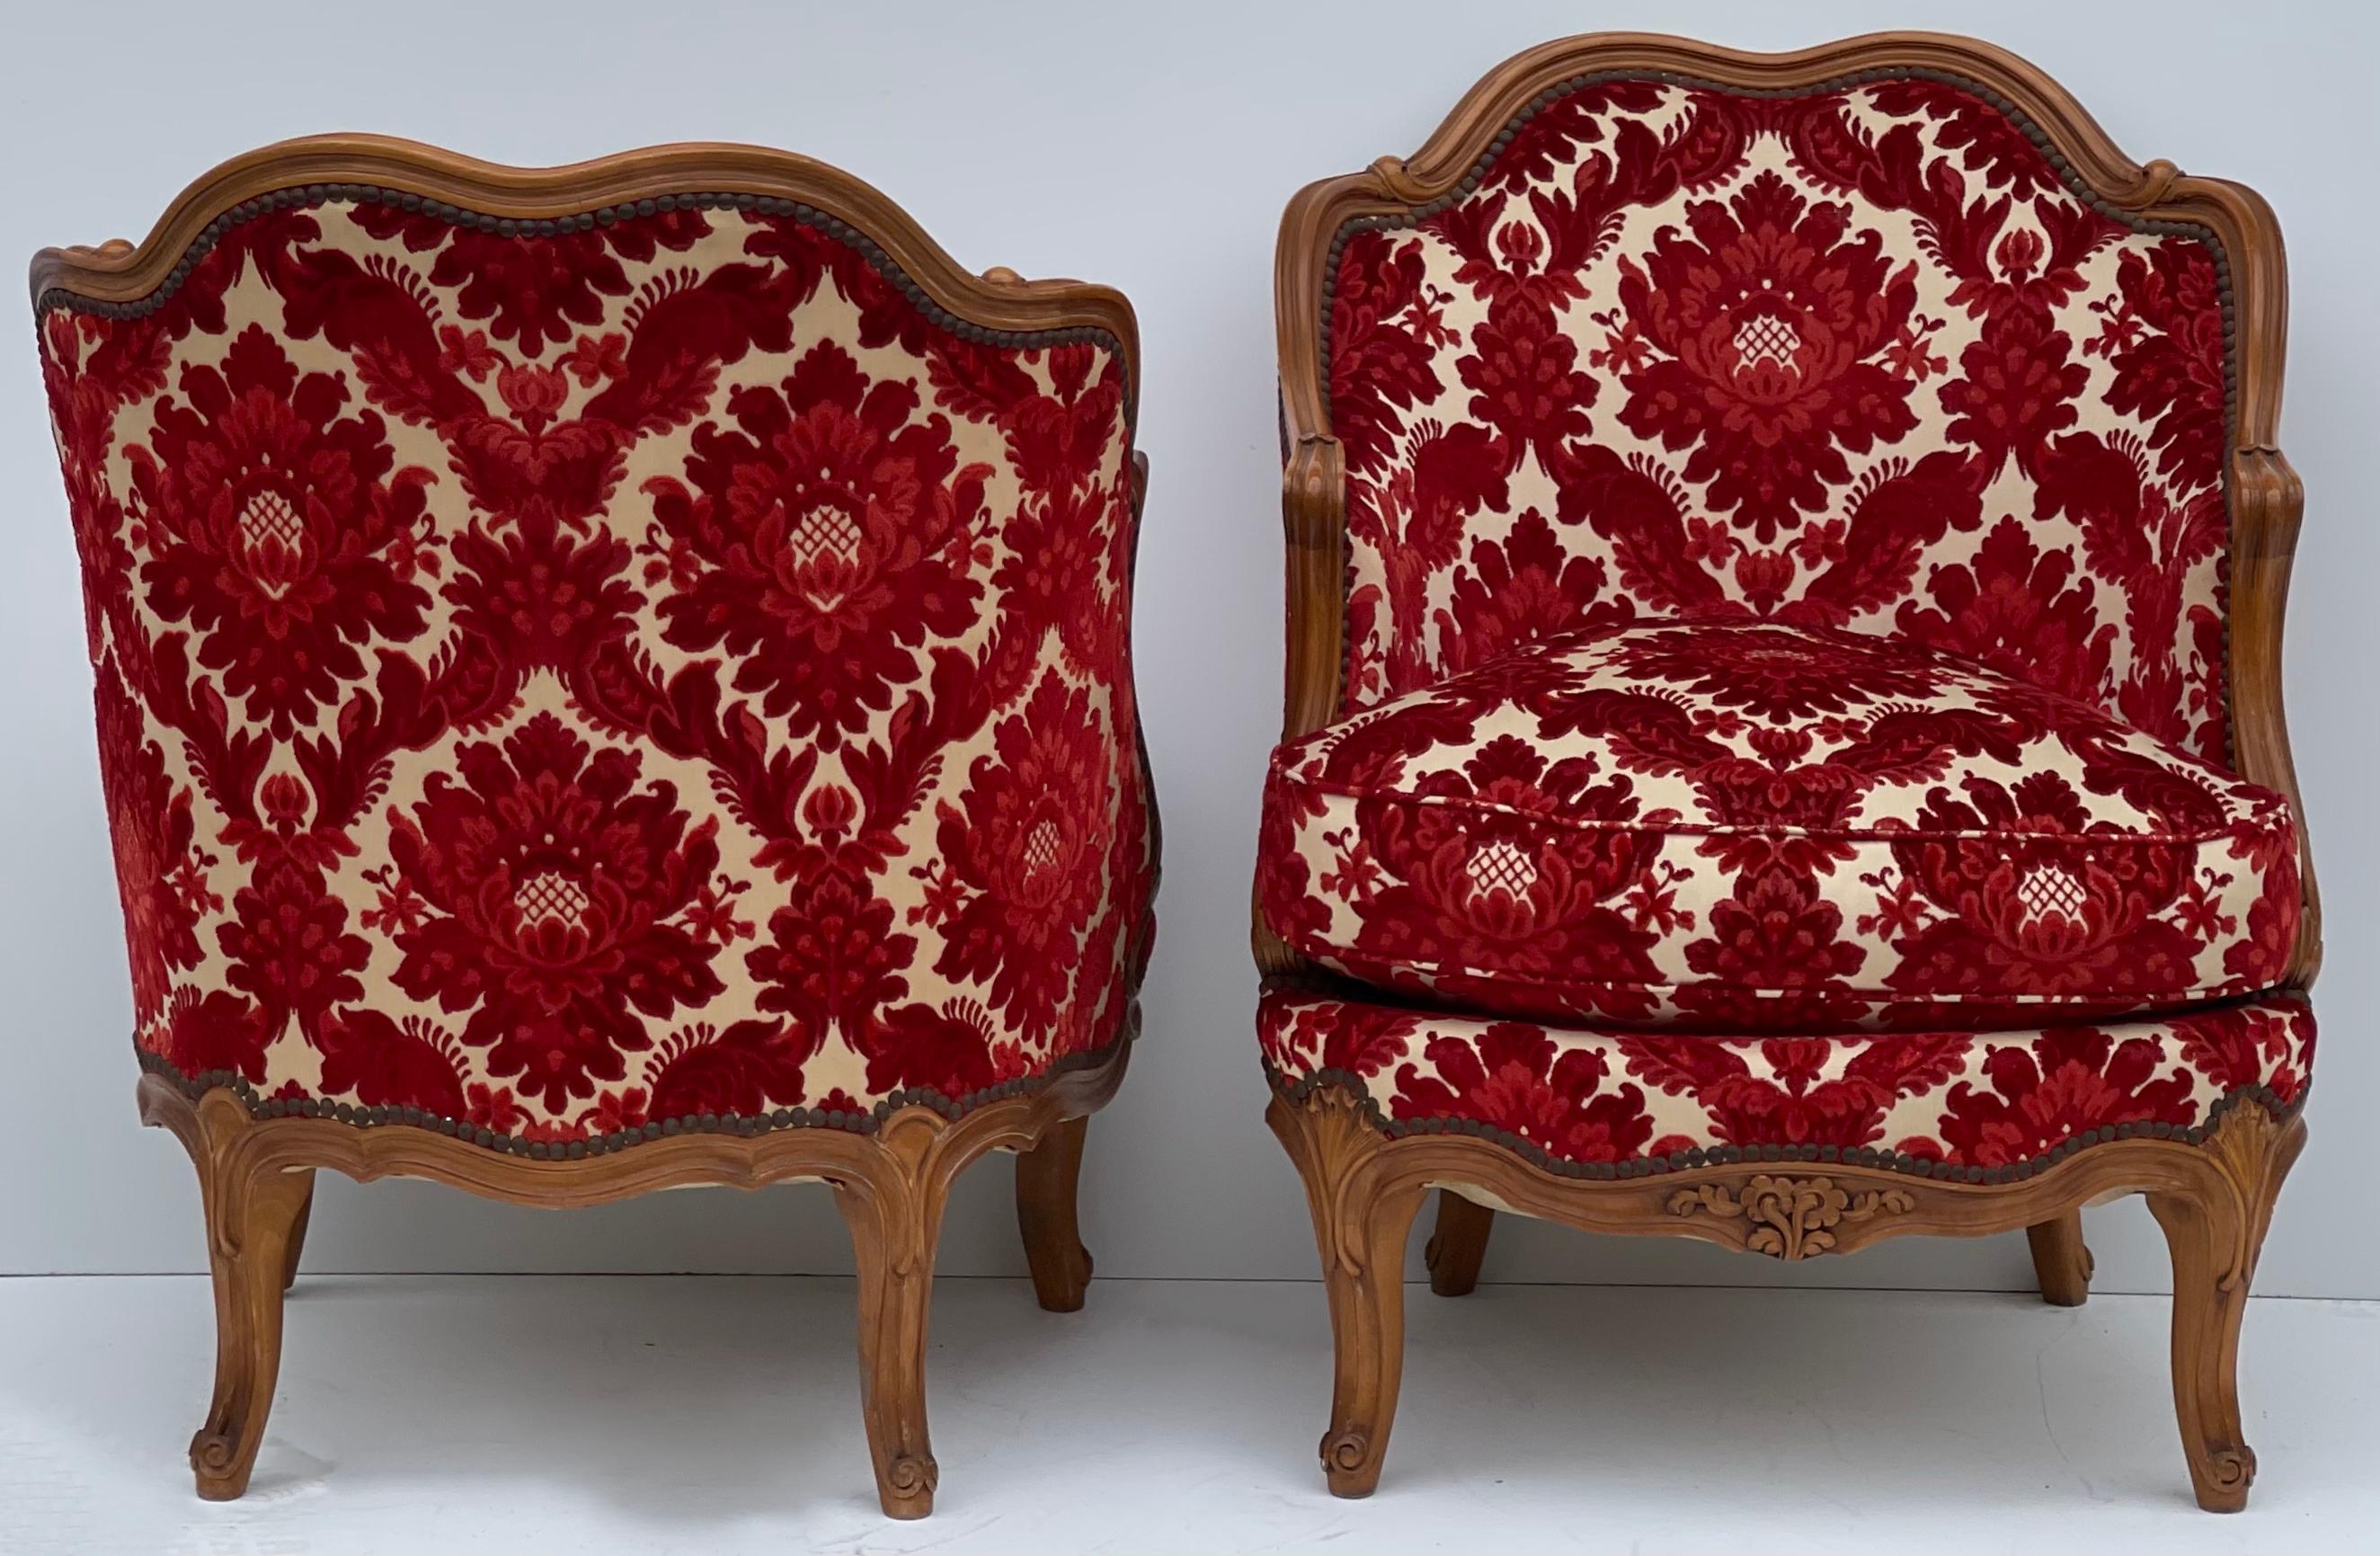 1930s French Carved Fruitwood Chairs in Red Cut Velvet Damask, Pair 4